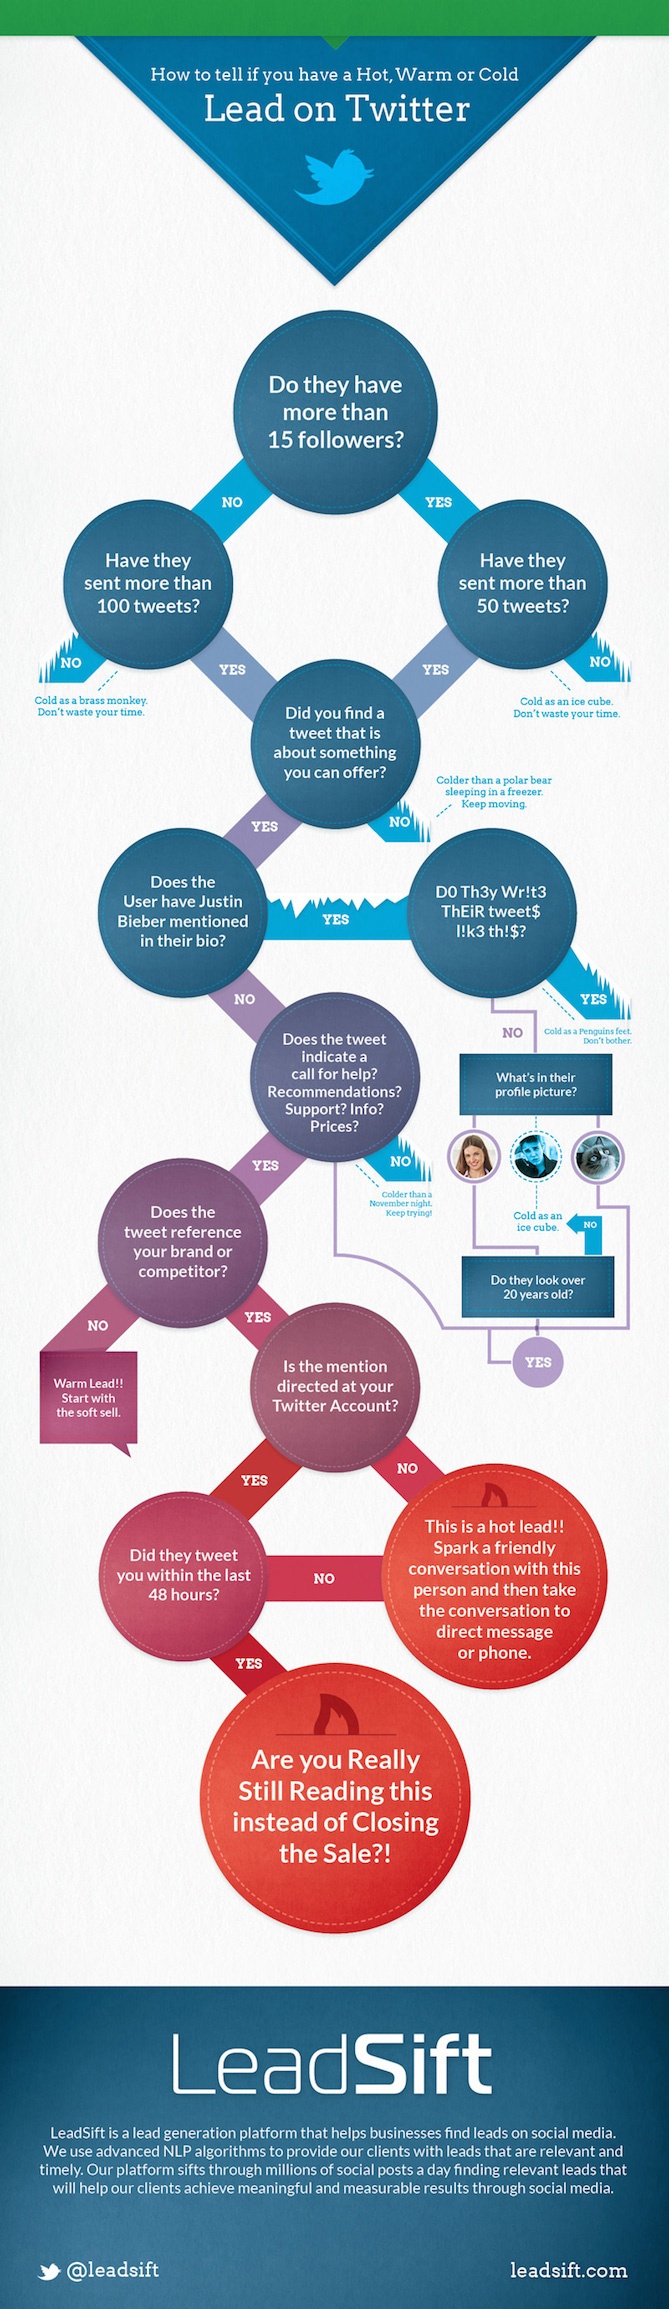 how-to-twitter-leads-infographic.jpg